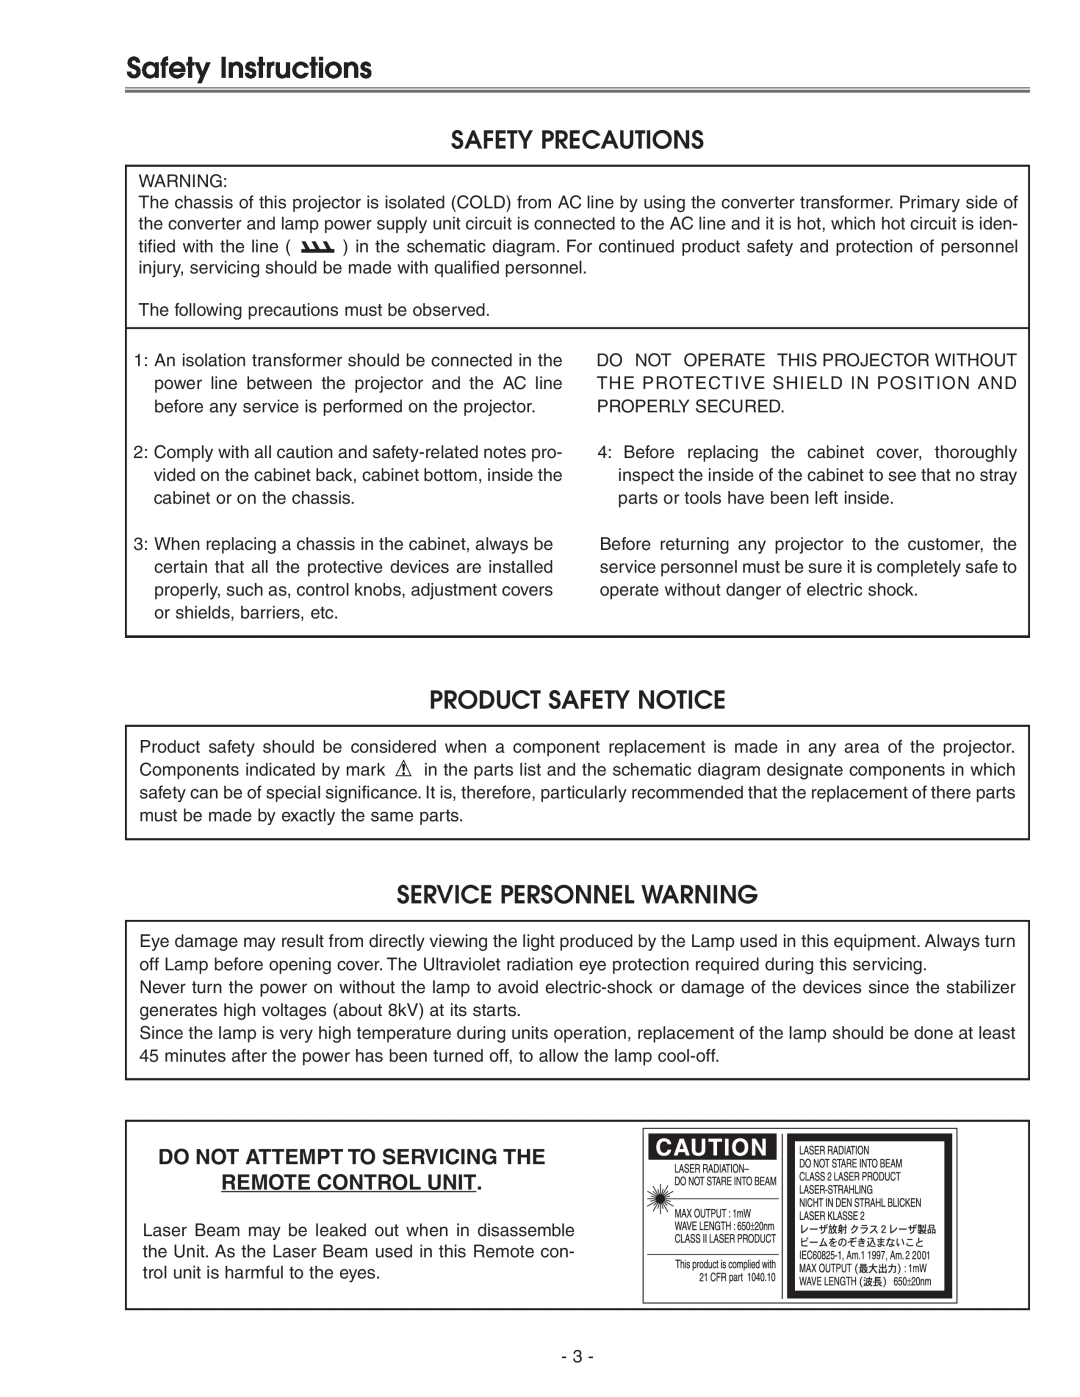 Eiki LC-X71 LC-X71L Safety Instructions, Safety Precautions, Product Safety Notice, Service Personnel Warning 